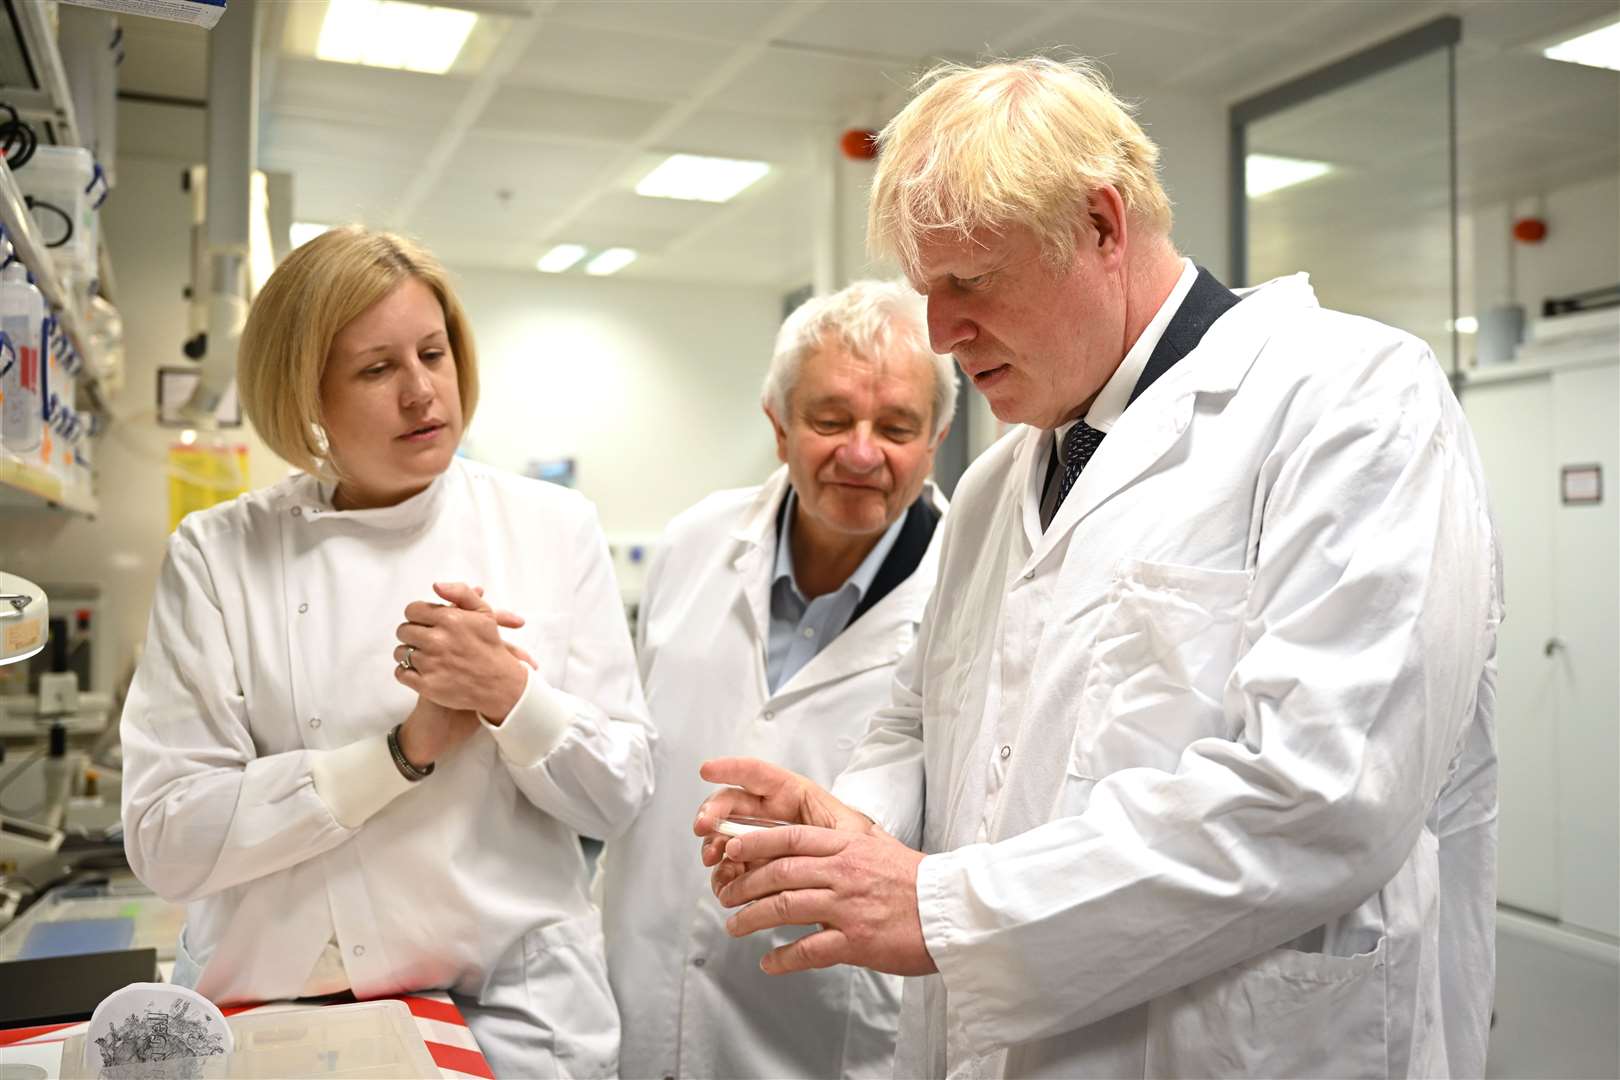 Boris Johnson during a visit to the Francis Crick Institute (Leon Neal/PA)